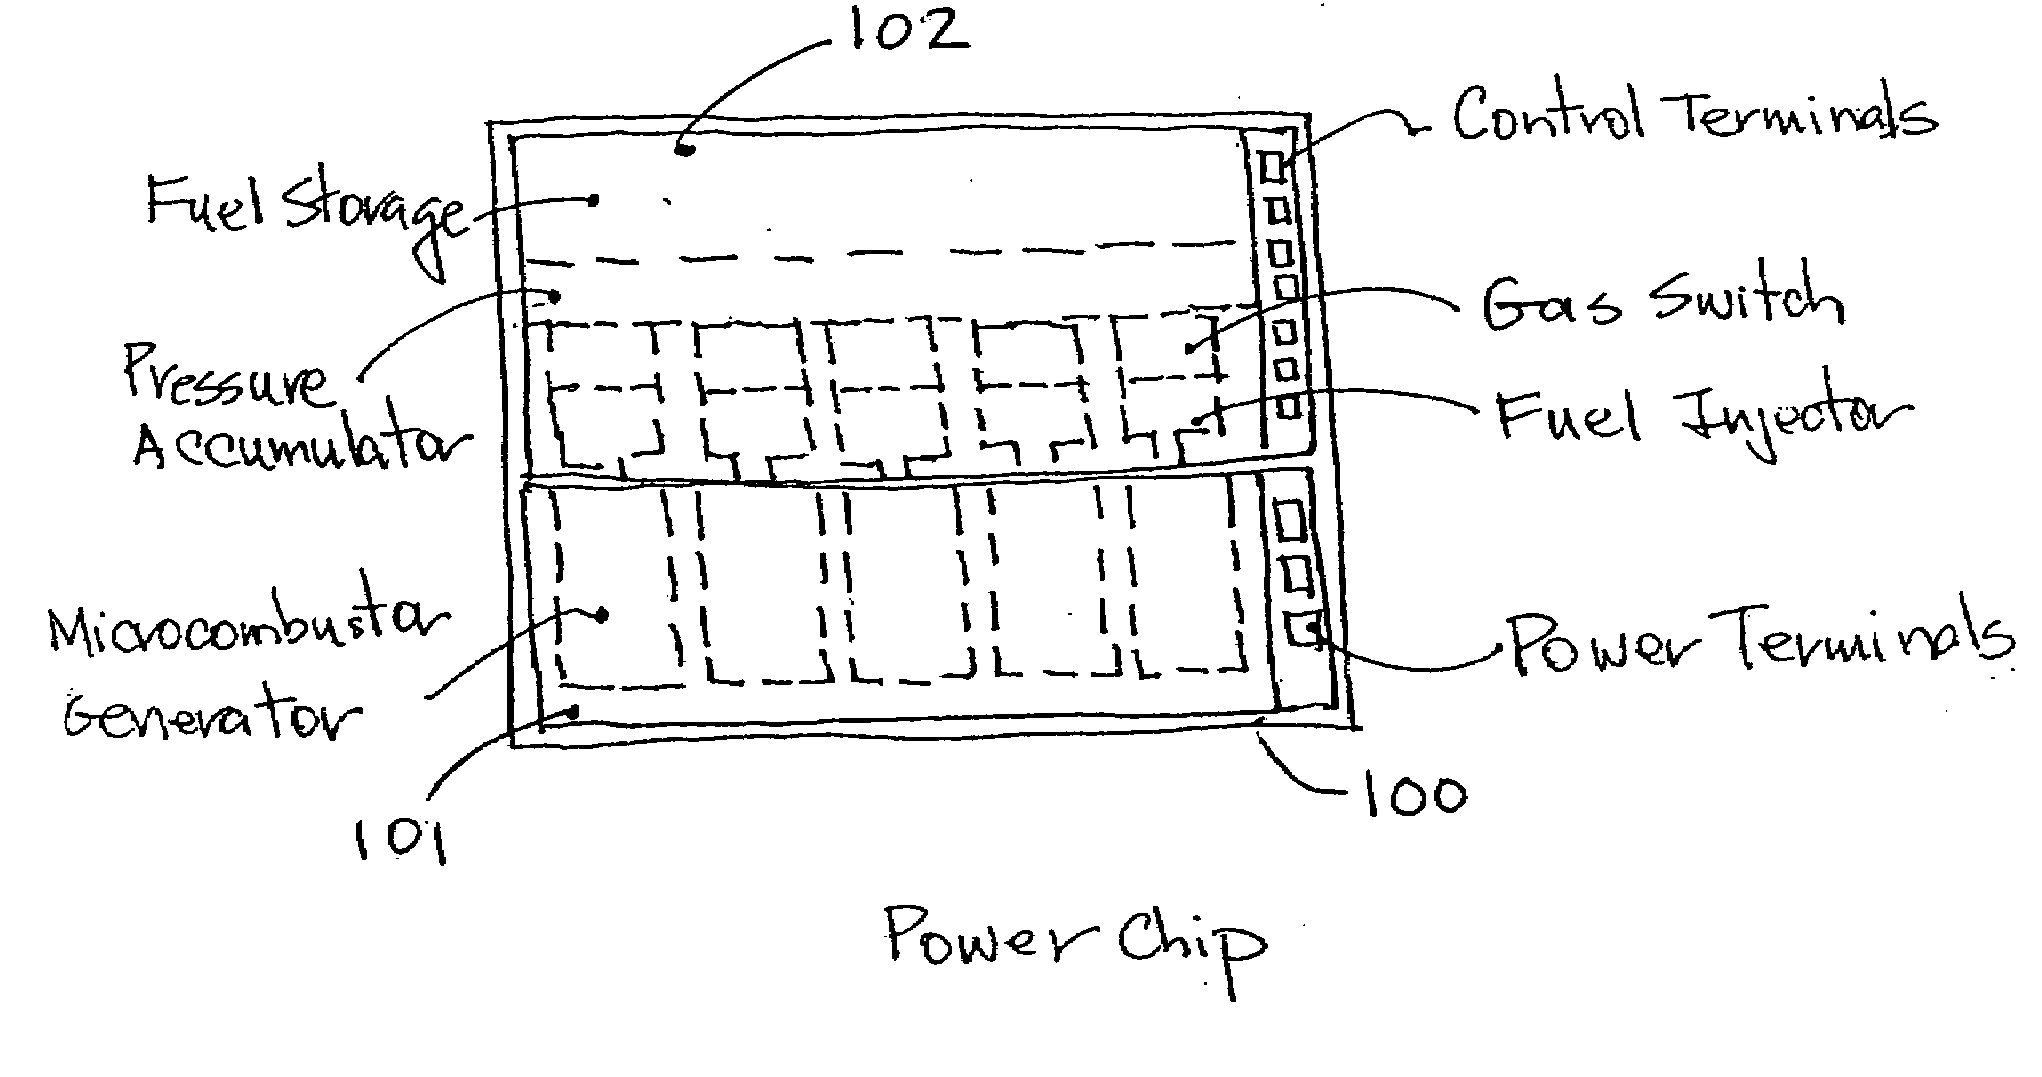 Energy efficient micro combustion system for power generation and fuel processing